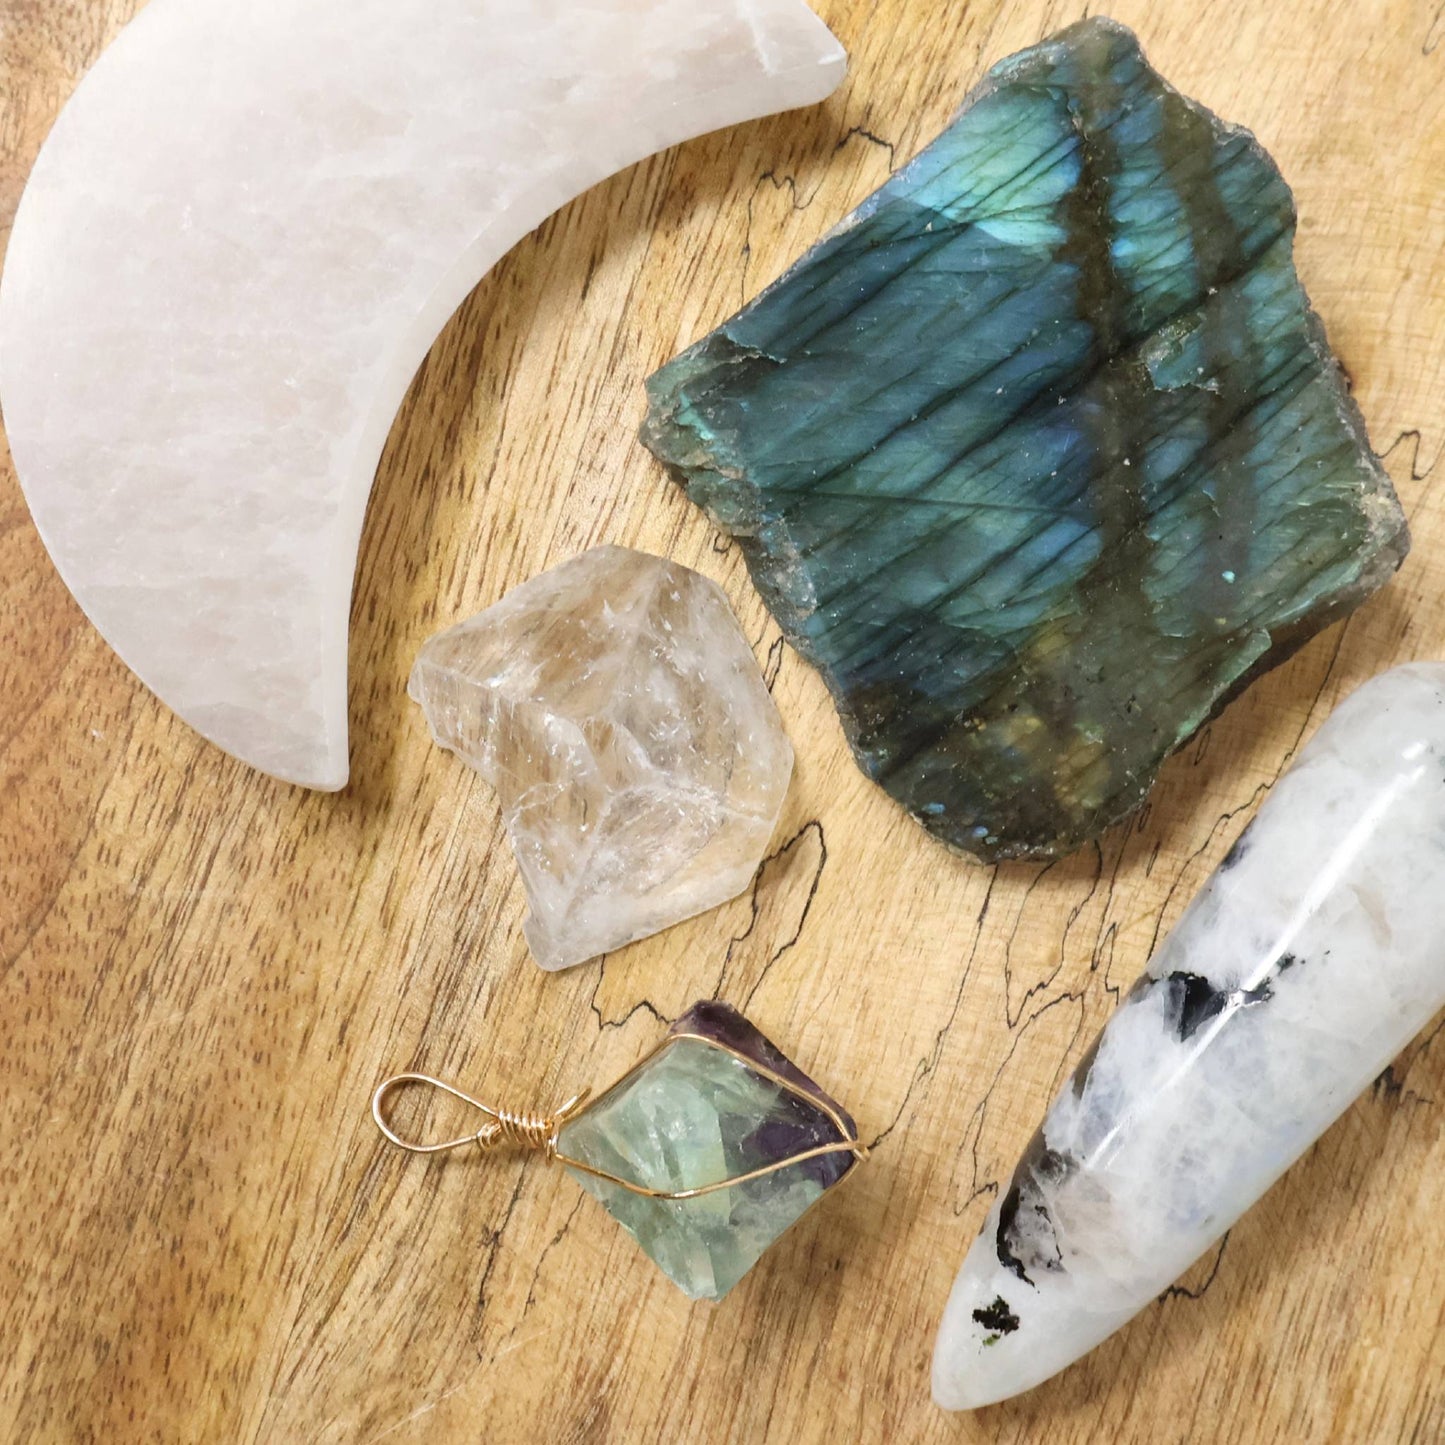 Deluxe Set of Crystals for The New Moon & New Beginnings